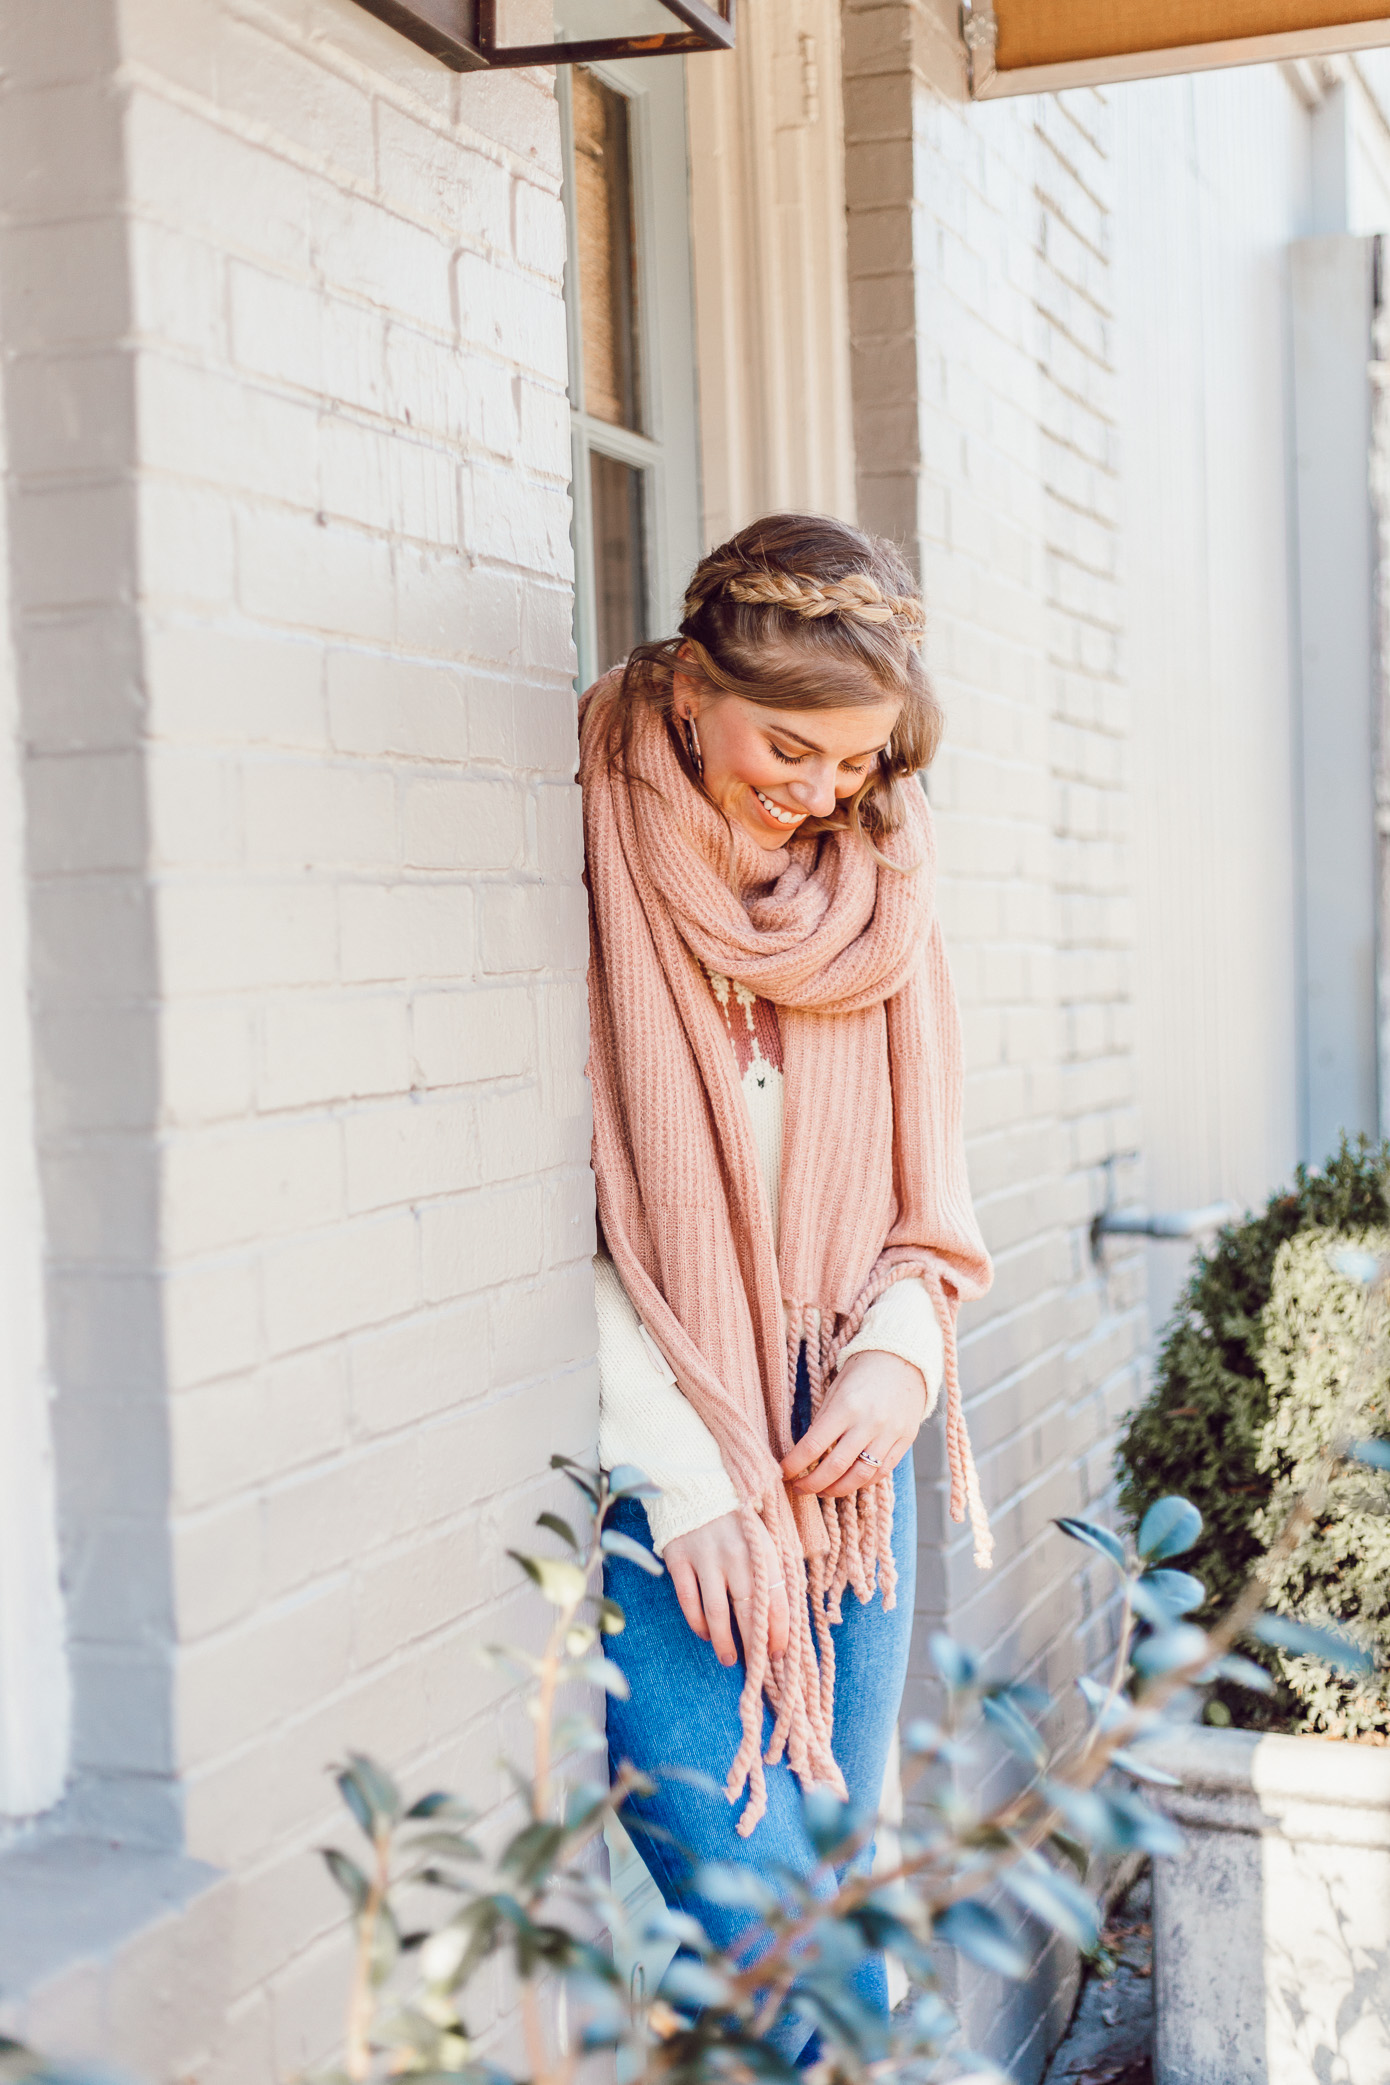 Madewell Keaton Fair Isle Sweater | 10 Things I Want to Make Happen In 2019, 2019 Goals | Louella Reese Blog